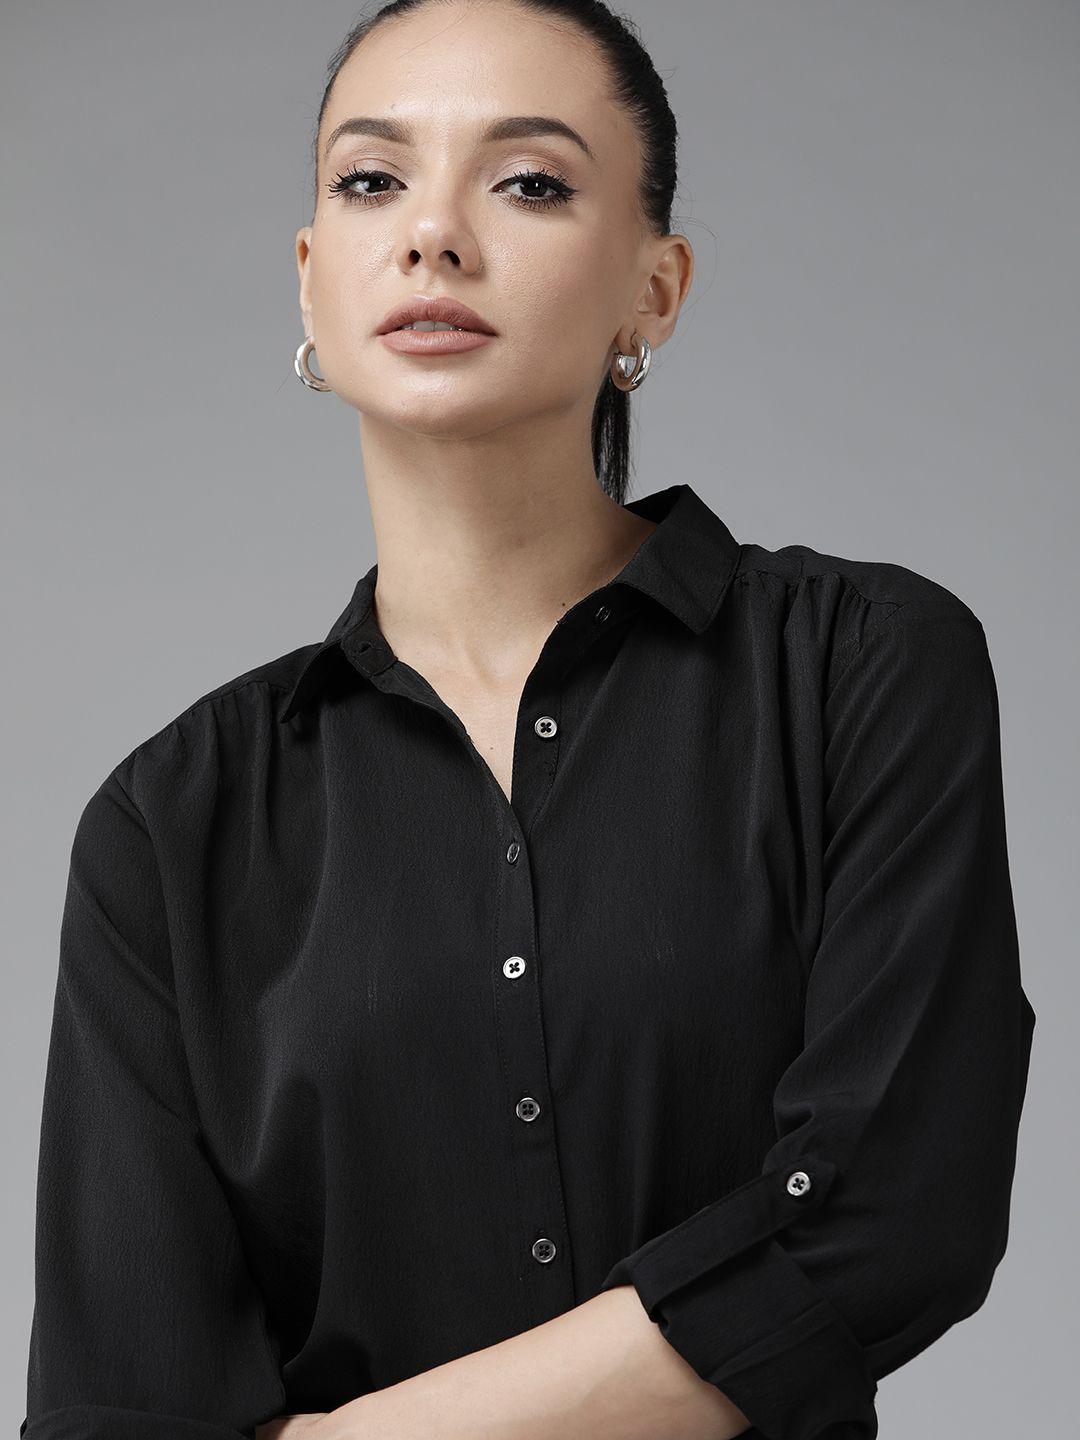 the roadster lifestyle co women black solid casual shirt